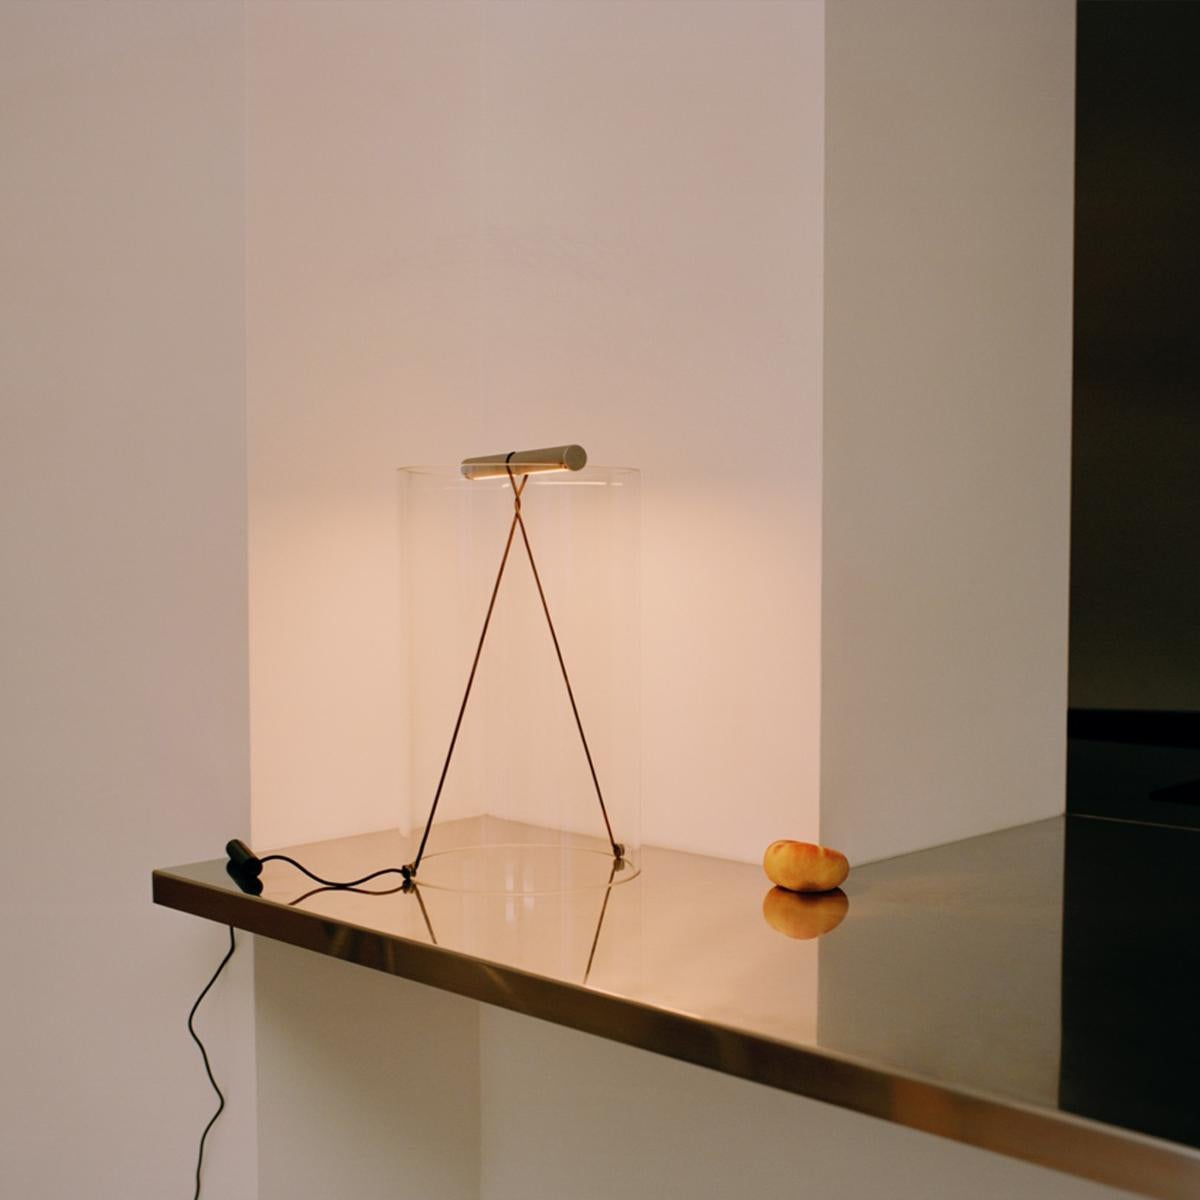 Glass Flos To-Tie T3 Table Lamp in Anodized Natural by Guglielmo Poletti